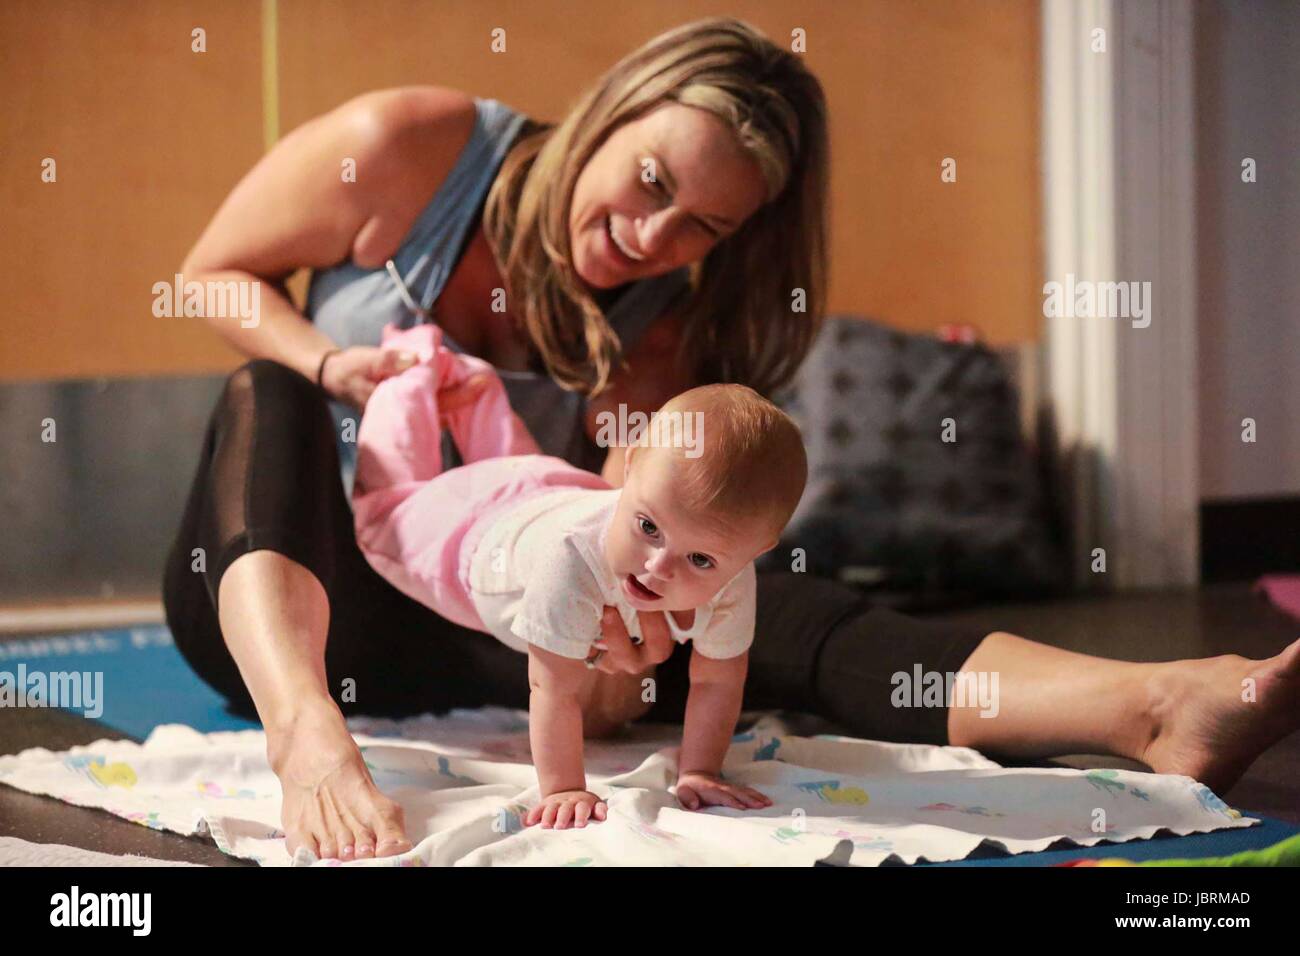 June 12, 2017 - Florida, U.S. - Eight-month-old Emily Rasquin of West Palm Beach participates in an Itsy Bitsy Yoga class at the Mandel Public Library of West Palm Beach Monday, June 12, 2017. ''The interaction is great, and it is good for motor development, '' said her mother Amy. According to teacher Kayla Willson of Jupiter, the classes help babies sleep better, digest better, and grow stronger. ''It encourages neuromuscular development and benefits bonding, digestion, sleep, and calm, '' she said. ''They sleep really well after class, which is great for the parents.'' Over the summer, the  Stock Photo